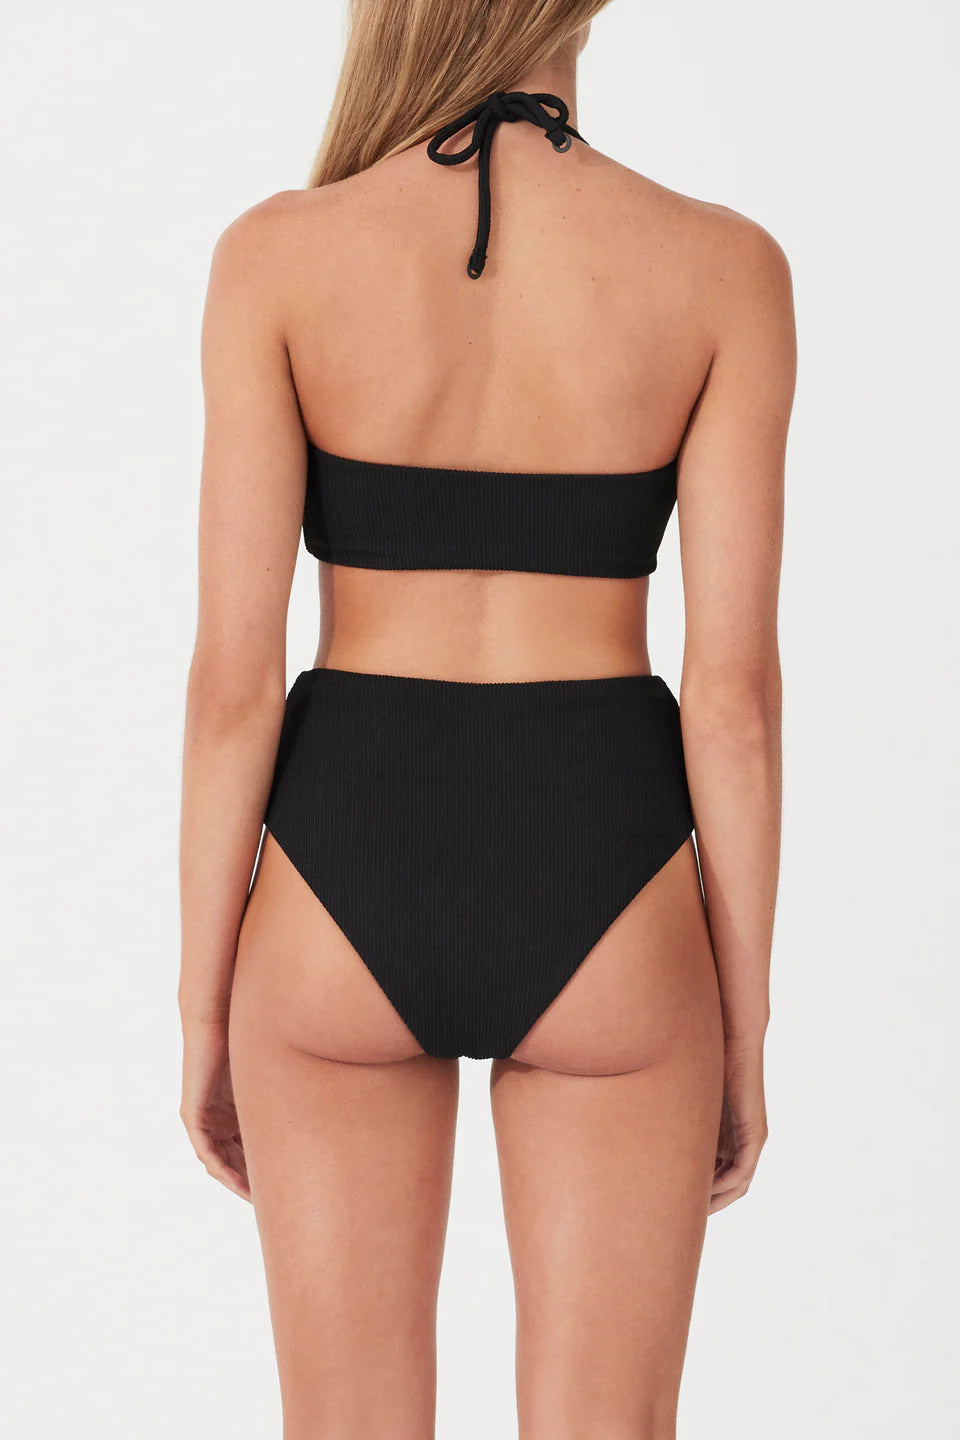 TEXTURED WAISTED FULL BRIEF | BLACK